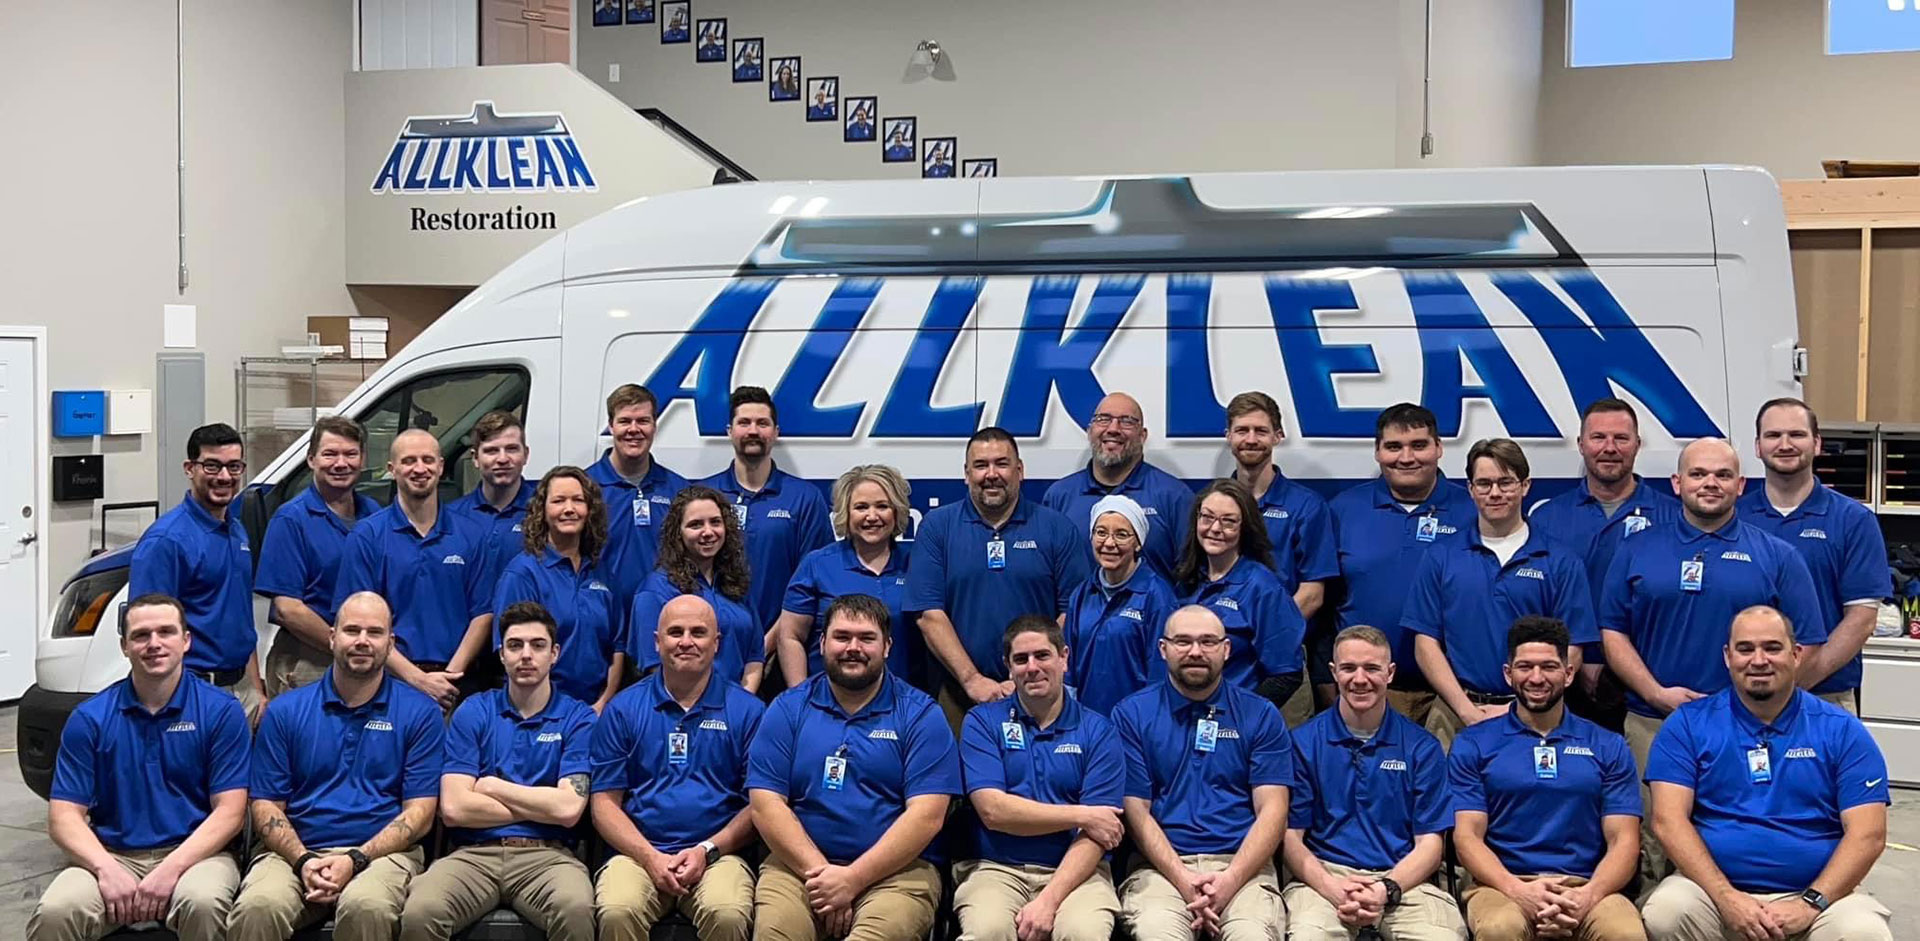 The Allklean Team - Water Damage Restoration and Carpet Cleaners